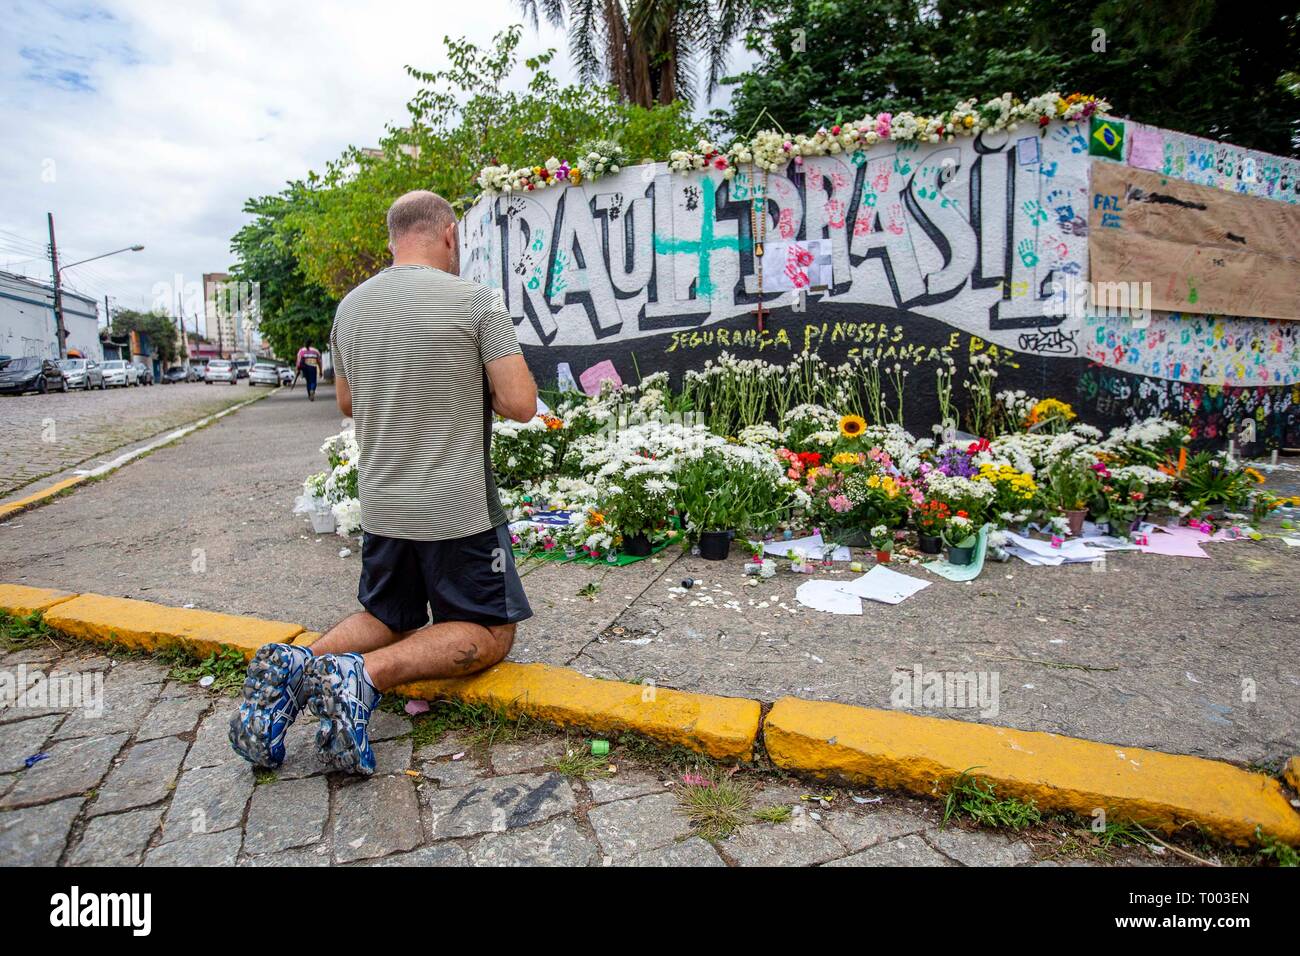 Sao Paulo, Brazil. 16th March 2019. SP - Sao Paulo - 03/16/2019 - Movement State School Raul Brasil - Movement in front of Raul Brasil State School in the city of Suzano region of Sao Paulo, 3 days after the massacre that left 10 dead and several injured. People continue to pay homage to the victims, with prayers, flowers or the handprints of Maoes printed with colored paint on the school wall, which has become a symbol of solidarity throughout the days. Photo: Suamy Beydoun / AGIF Stock Photo